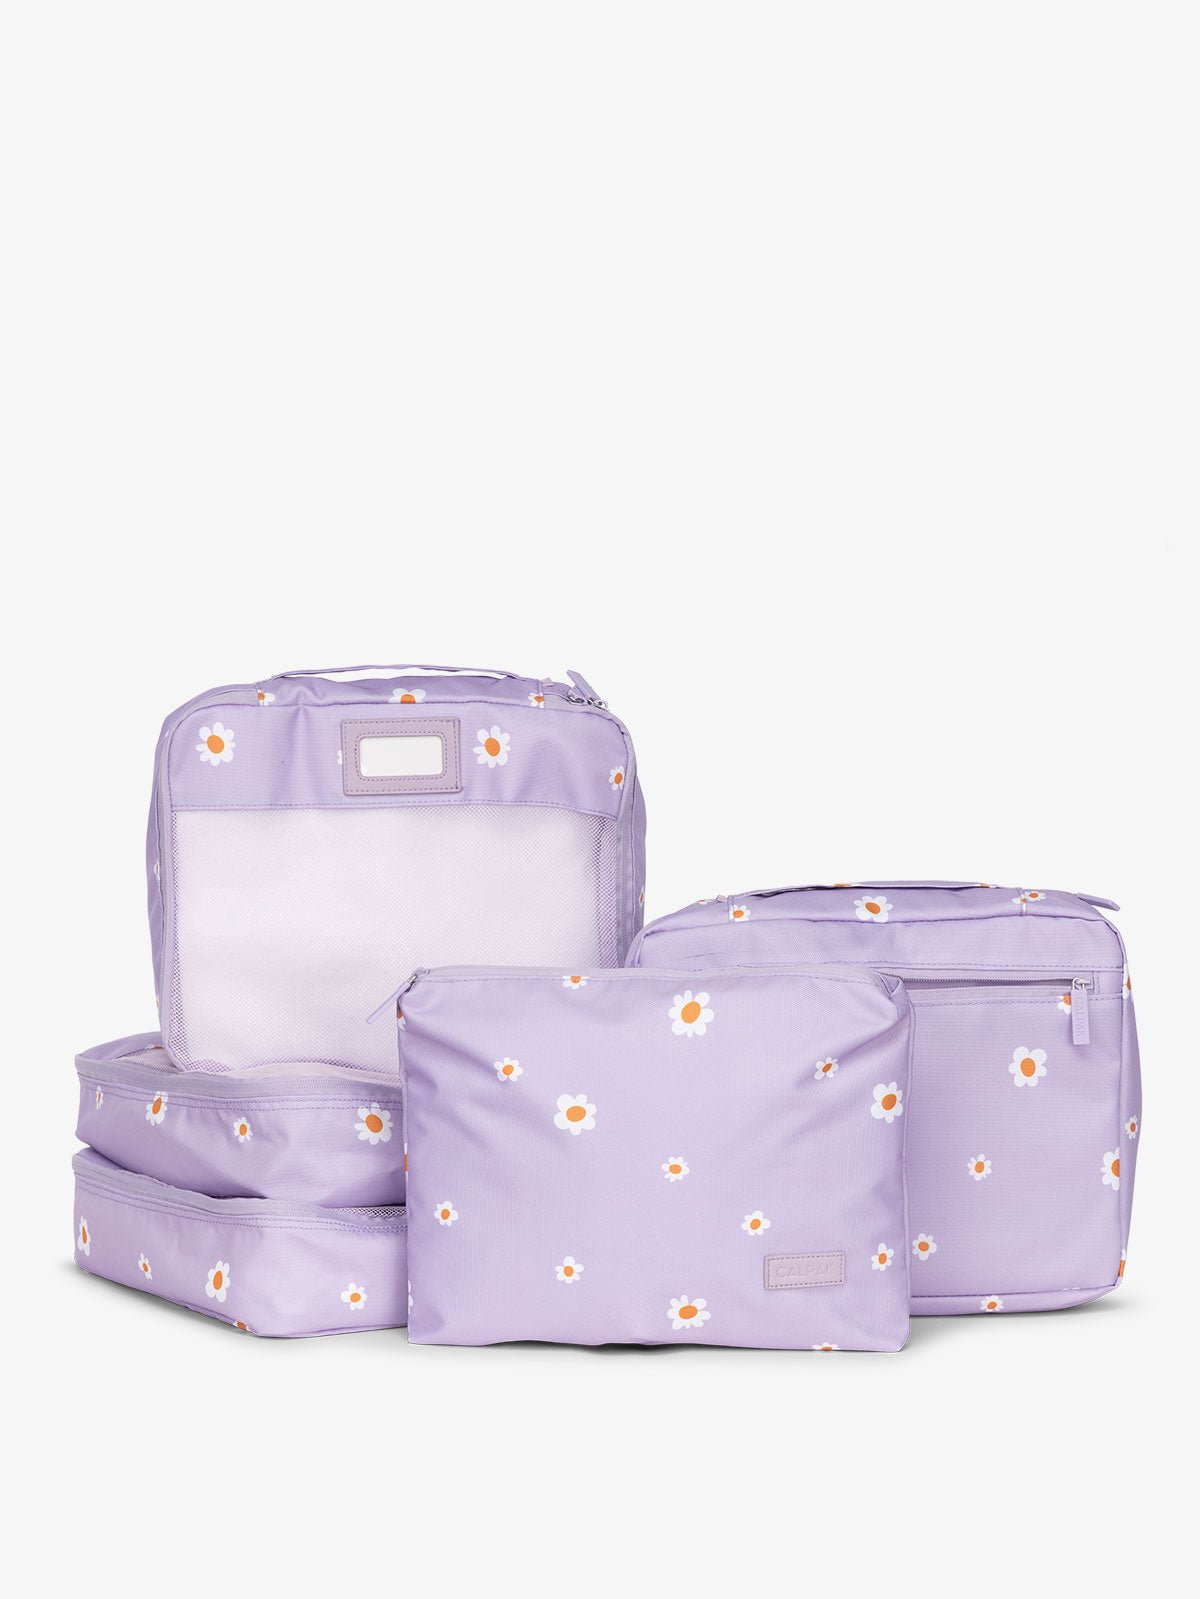 CALPAK 5 piece set packing cubes for travel with labels and top handles in orchid fields